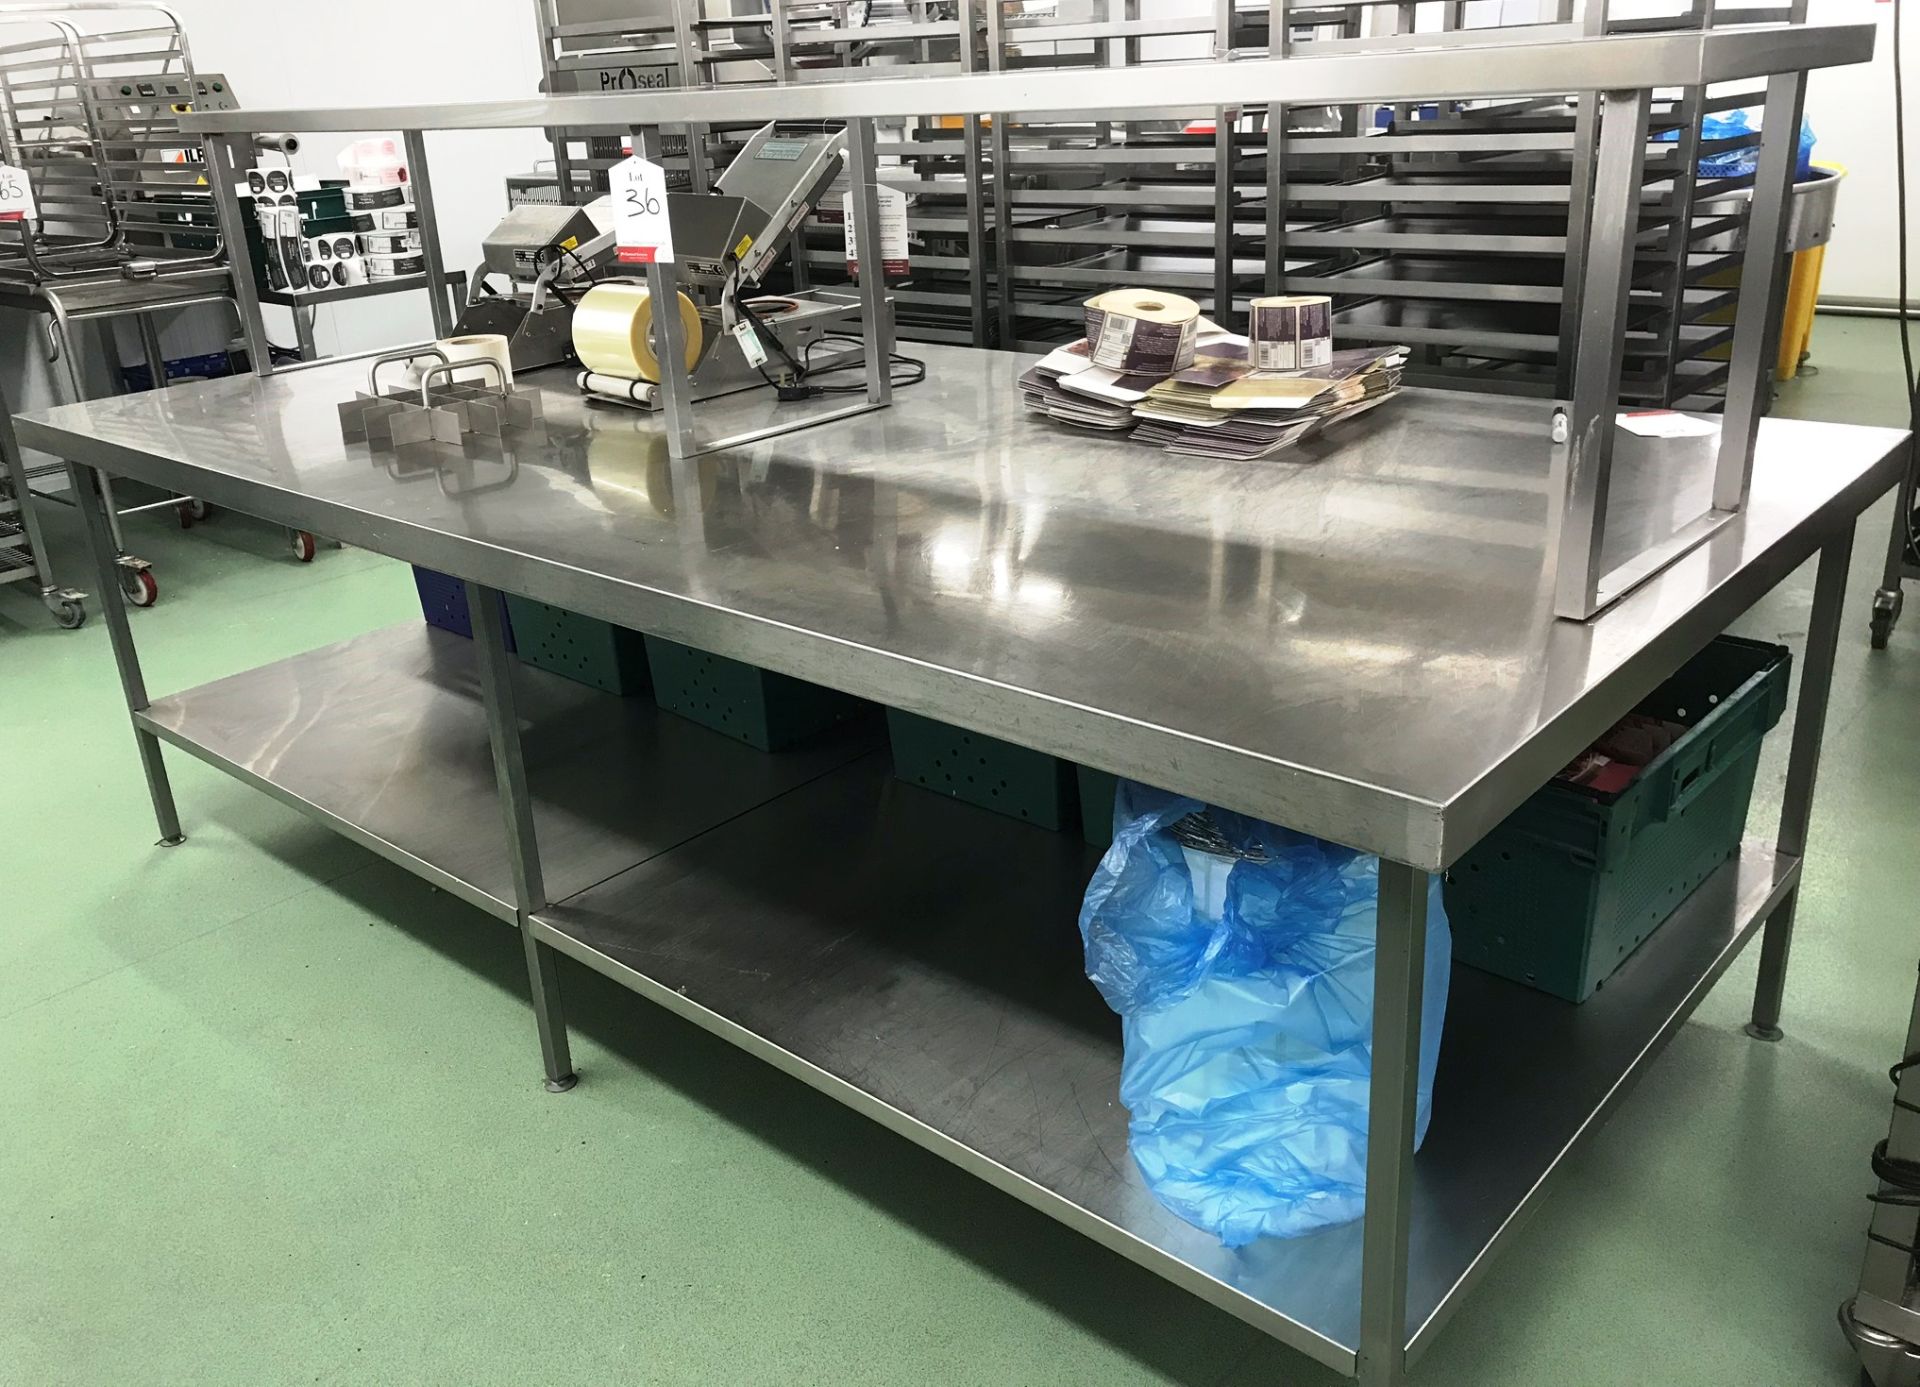 Stainless Steel Preparation Table w/ Gantry & Undershelf - 2850mm Length | CONTENTS NOT INCLUDED - Bild 2 aus 2